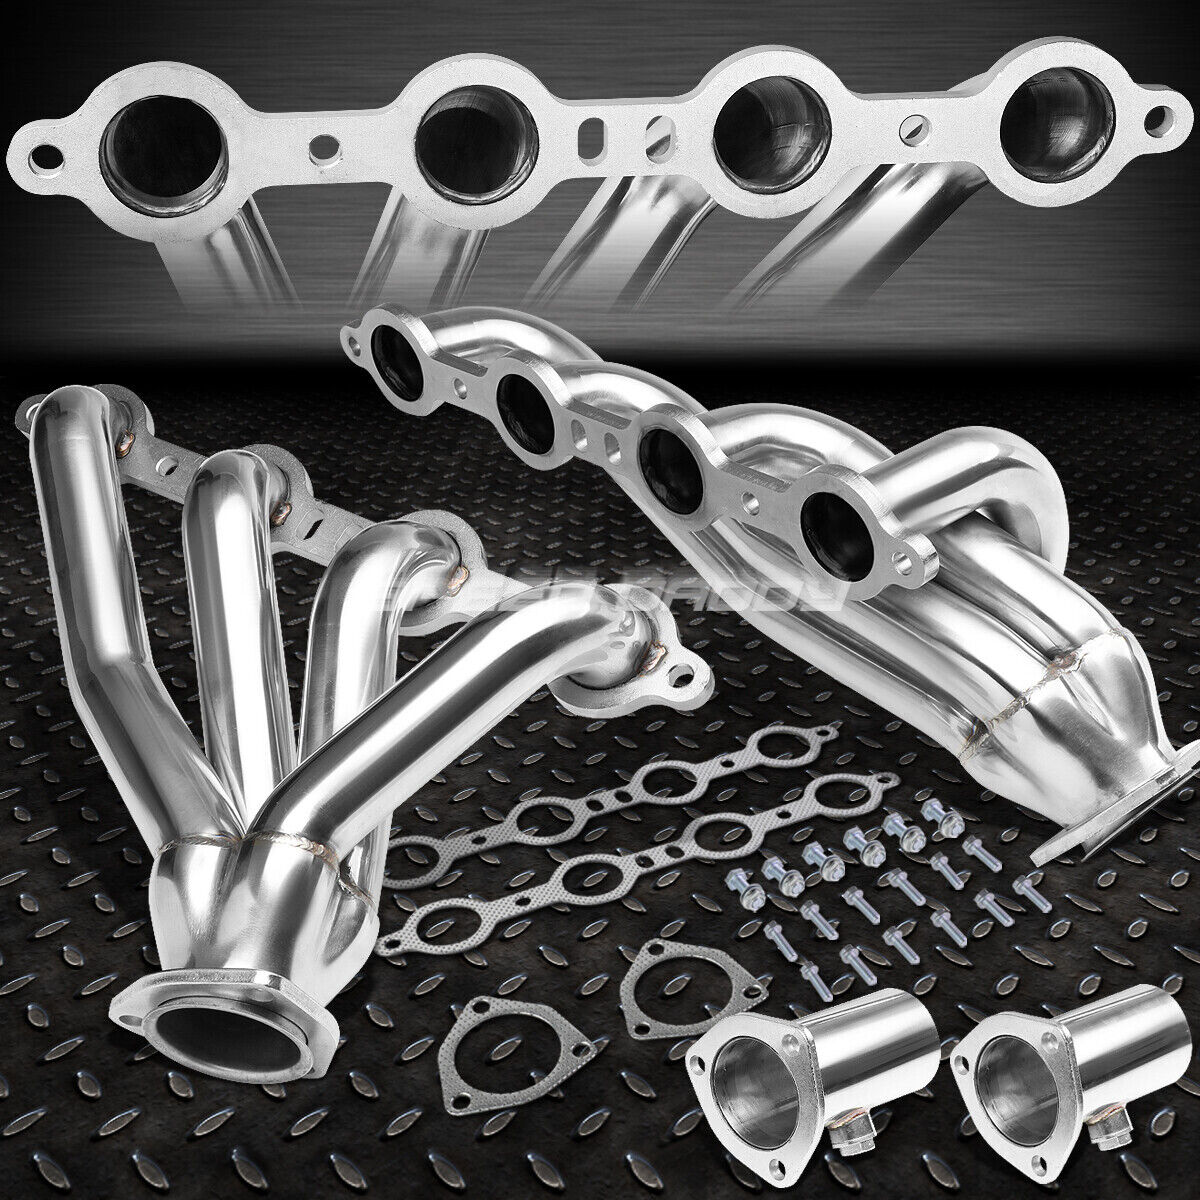 For 82-04 Gmc Sonoma S15 Chevy S10 V8 Swap 4-1 Stainless Exhaust Header Manifold